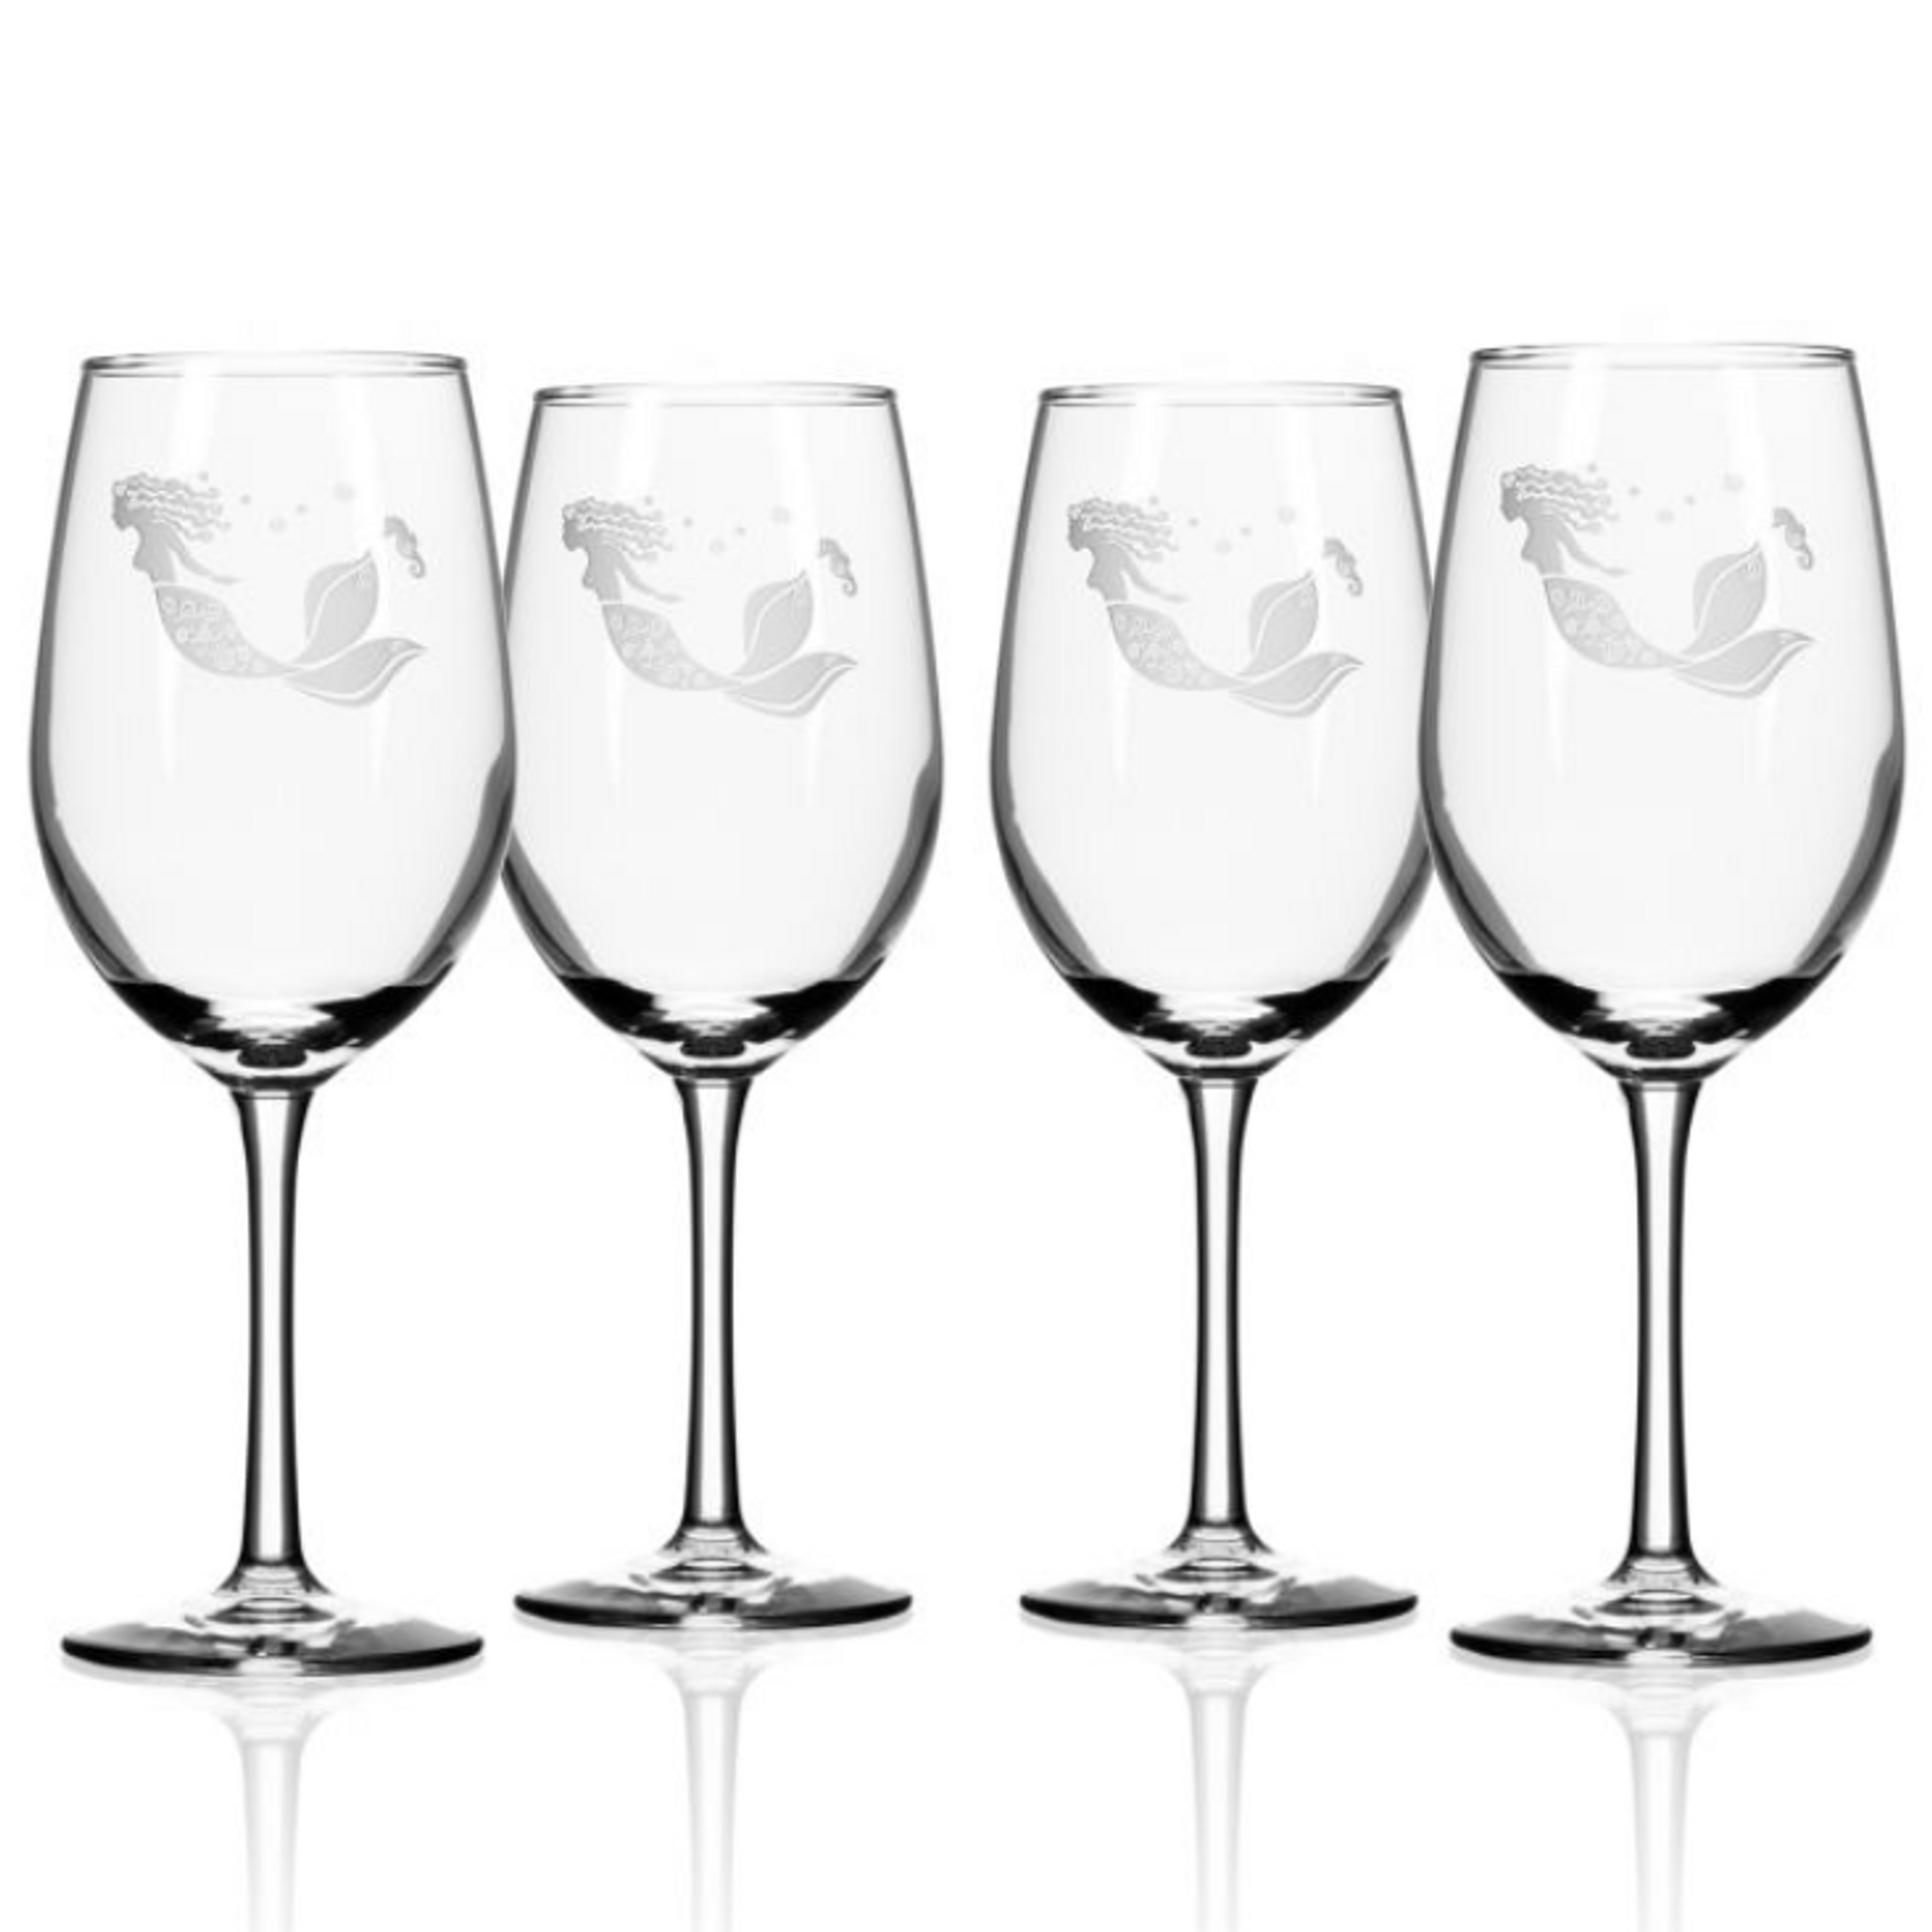 Rolf Glass Pineapple 12 oz. Clear White Wine Glass (Set of 4